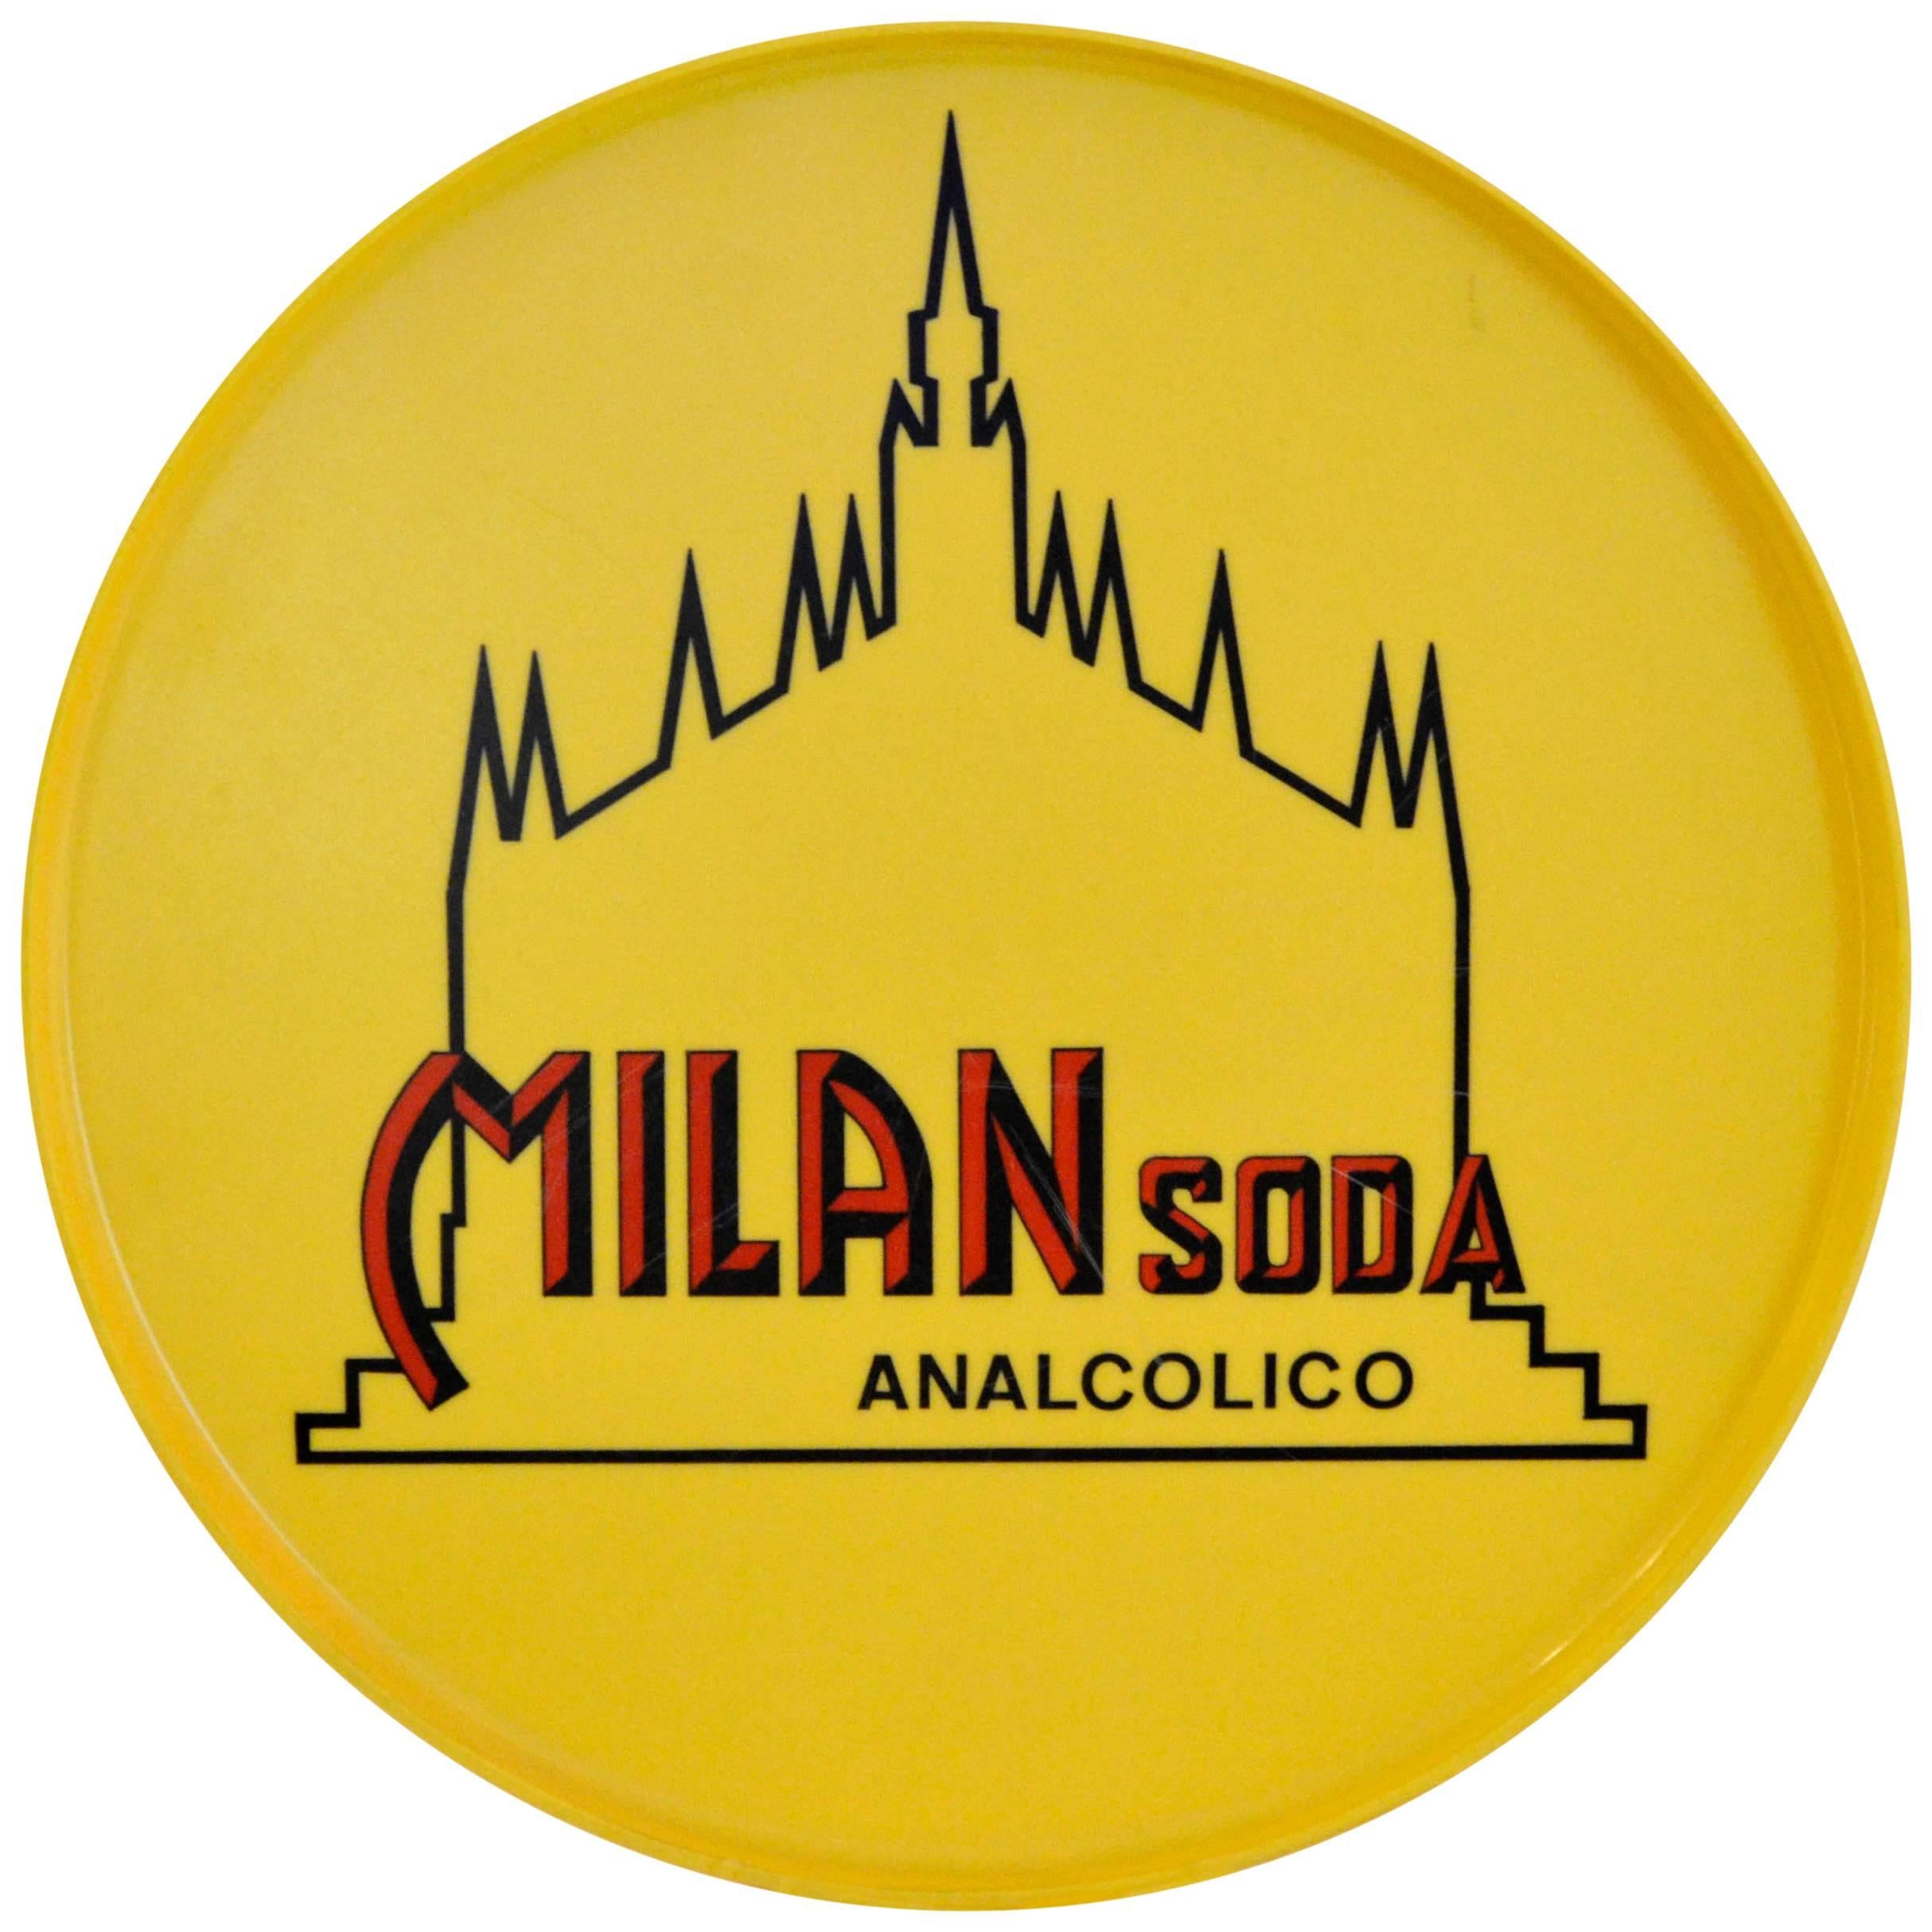 1960s Yellow Round Plastic Tray Milan Soda Analcolico Made in Italy For Sale